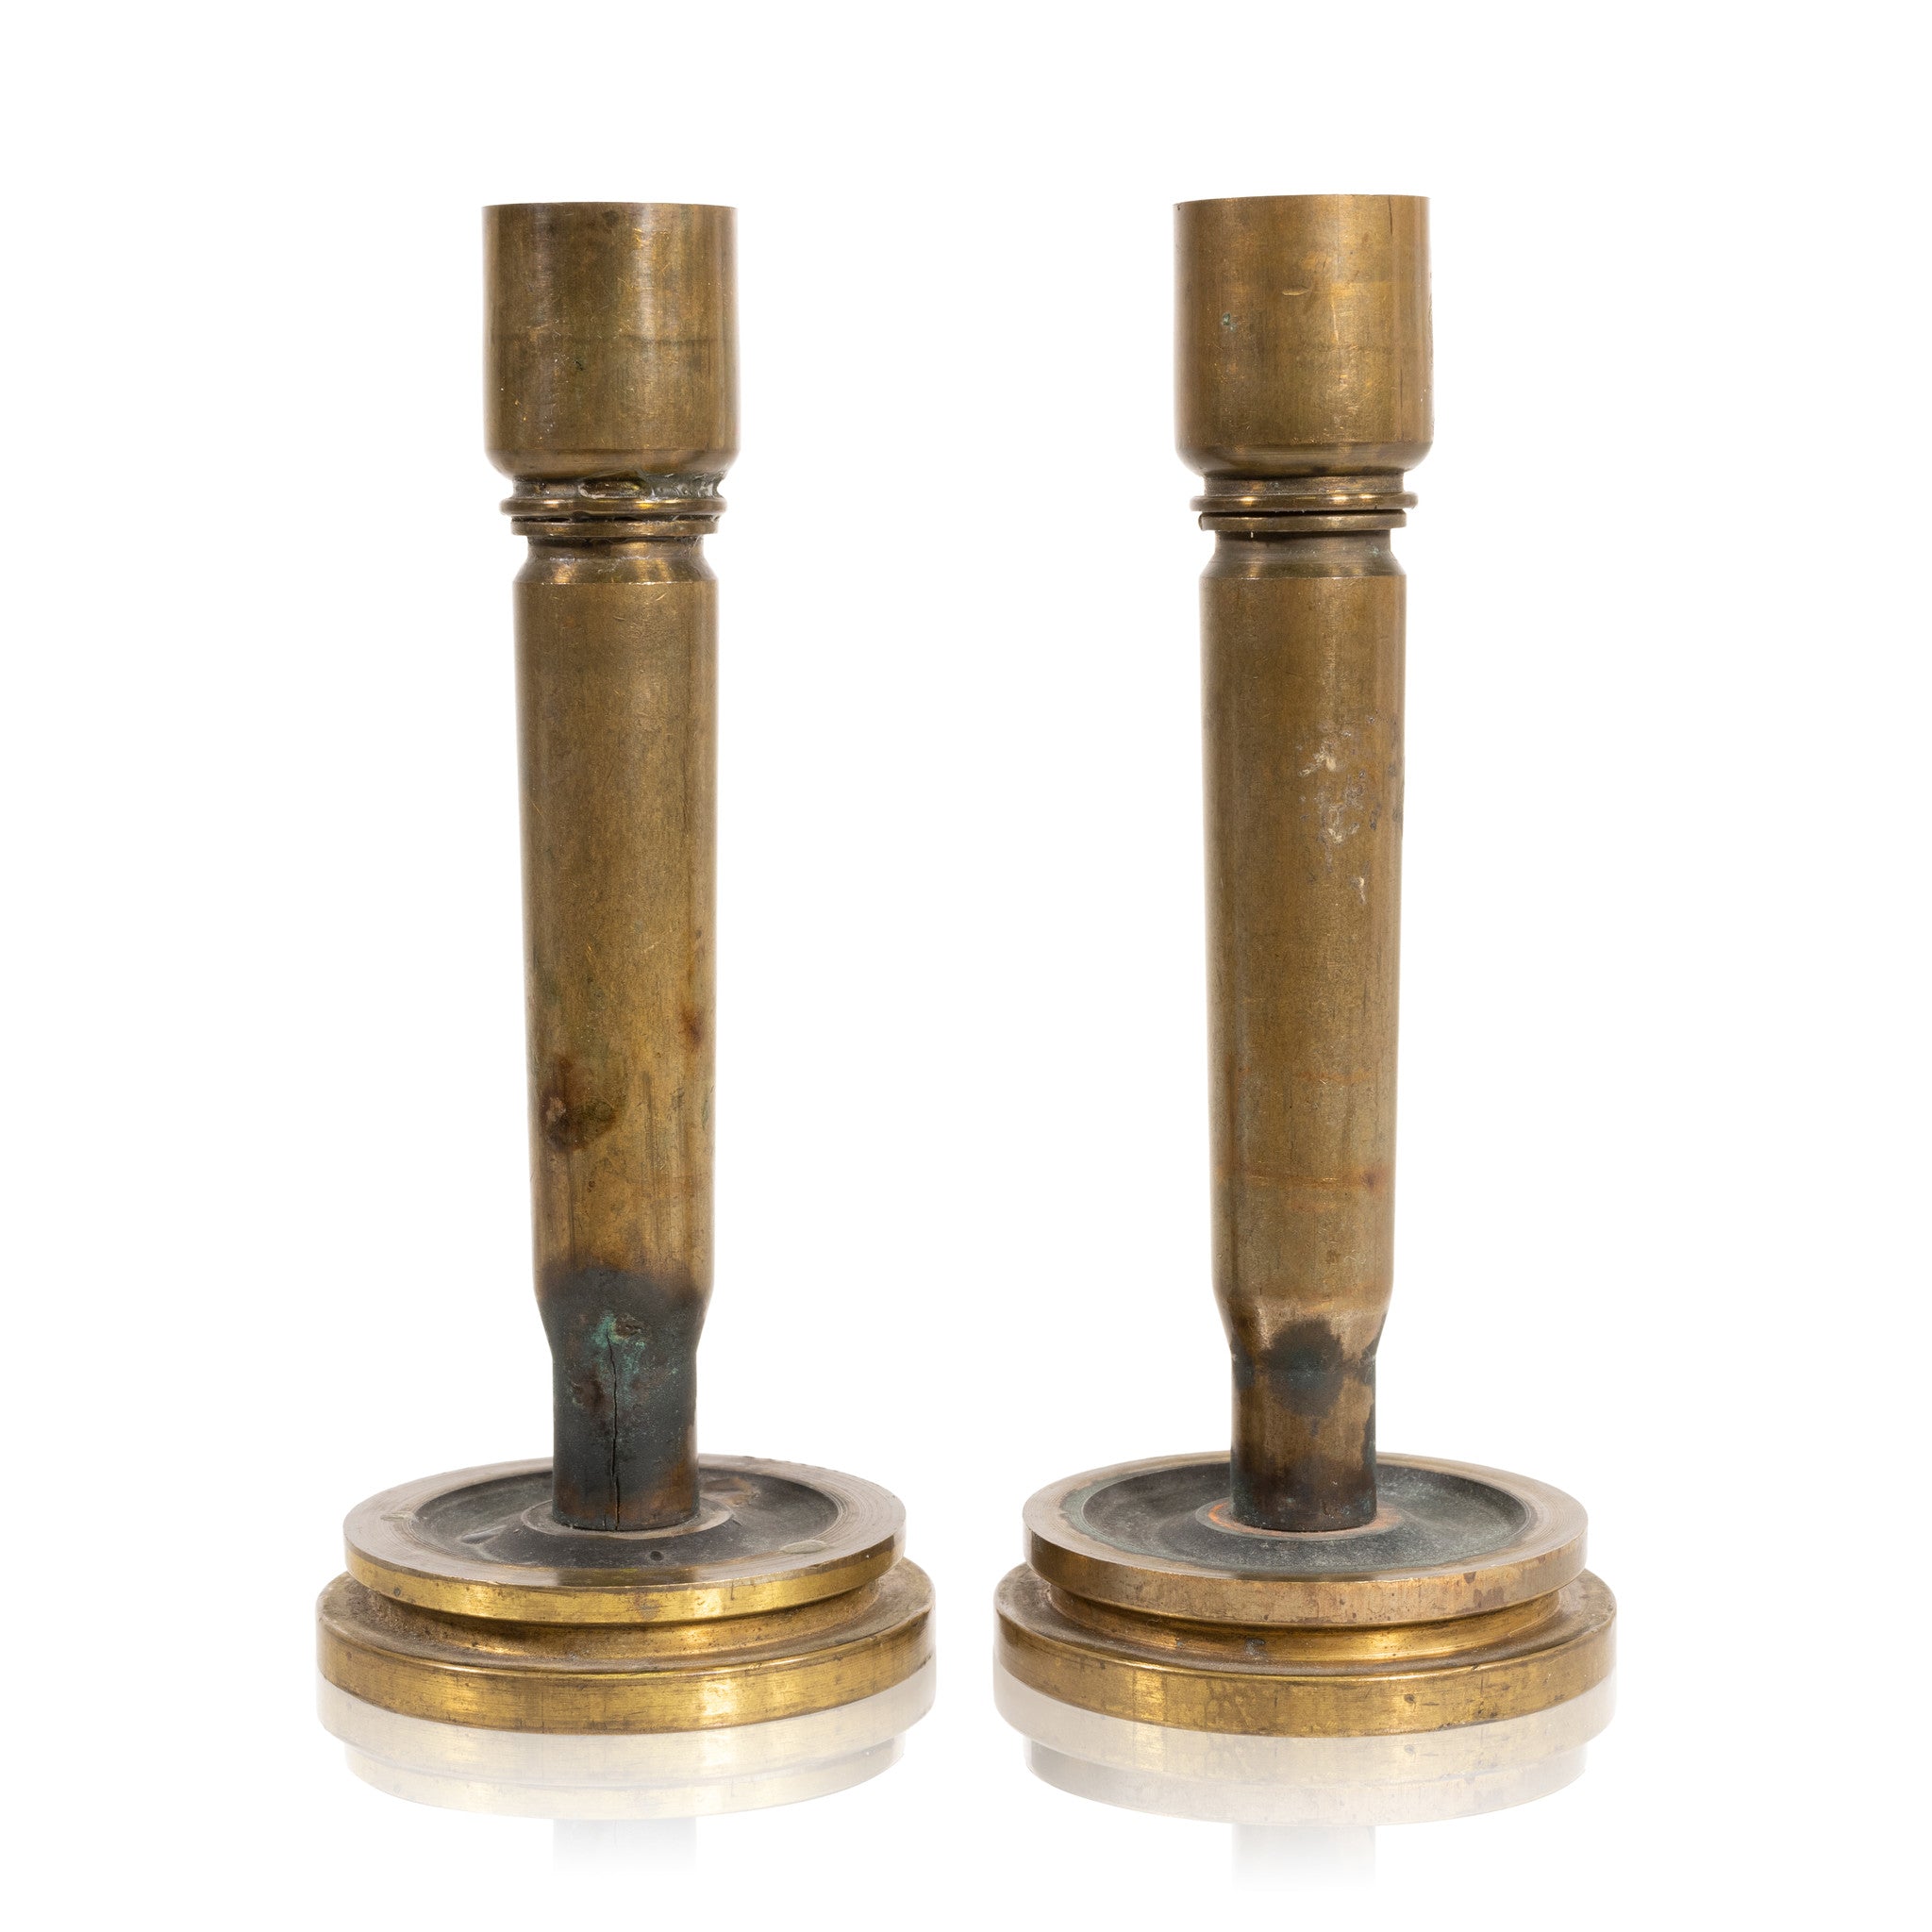 Pair Trench Art Candle Holders, Furnishings, Decor, Trench Art